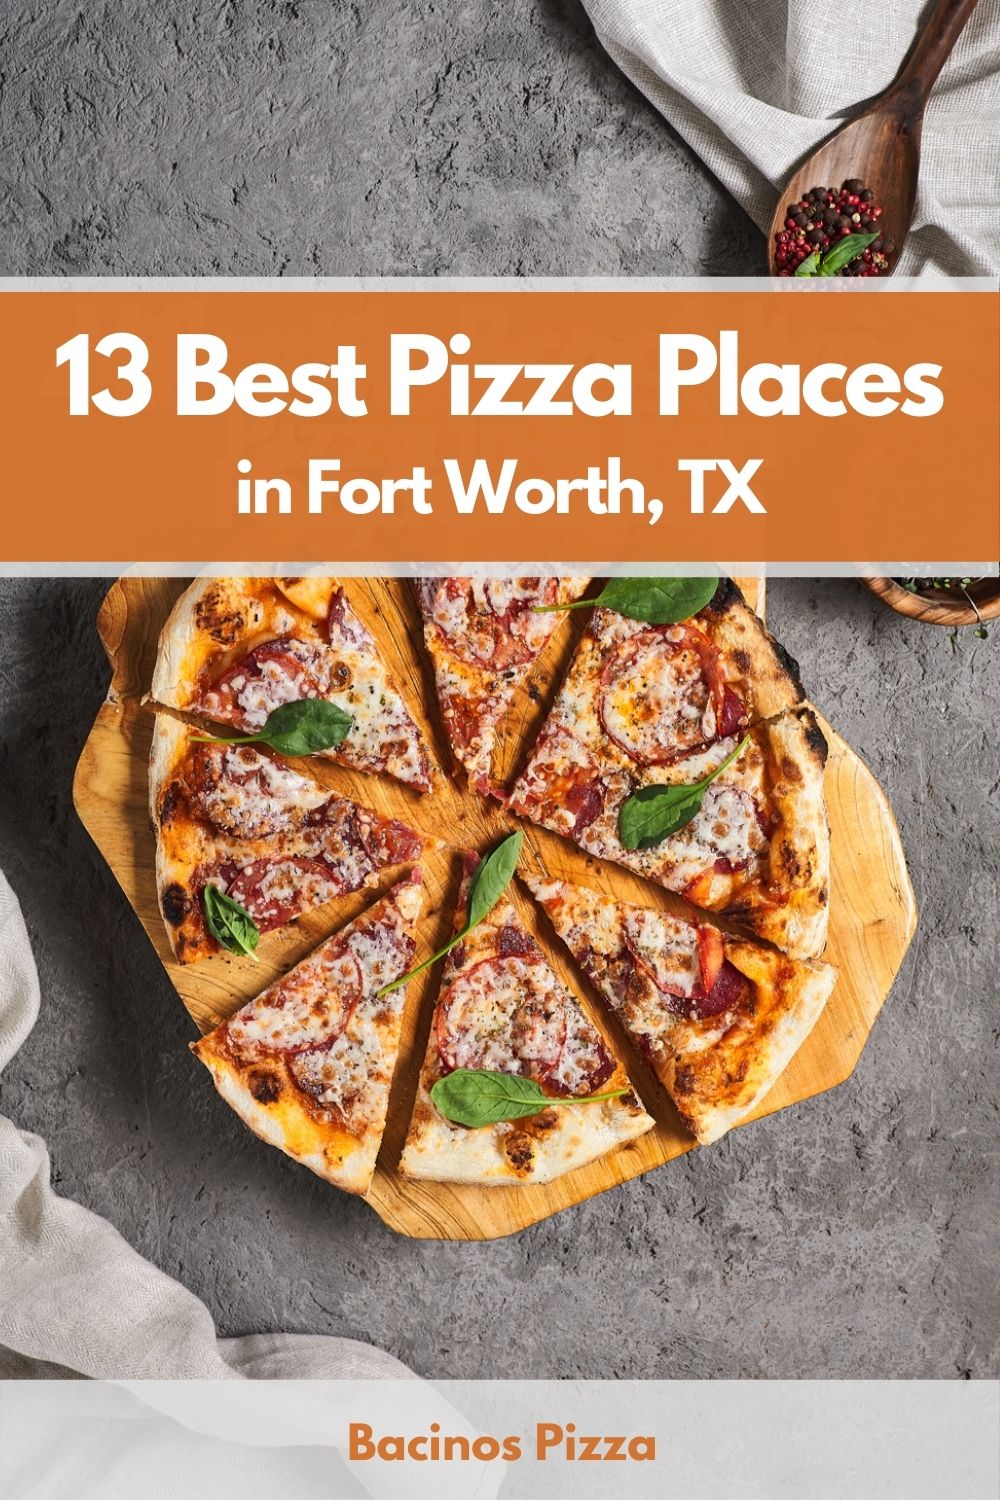 13 Best Pizza Places in Fort Worth, TX pin 2